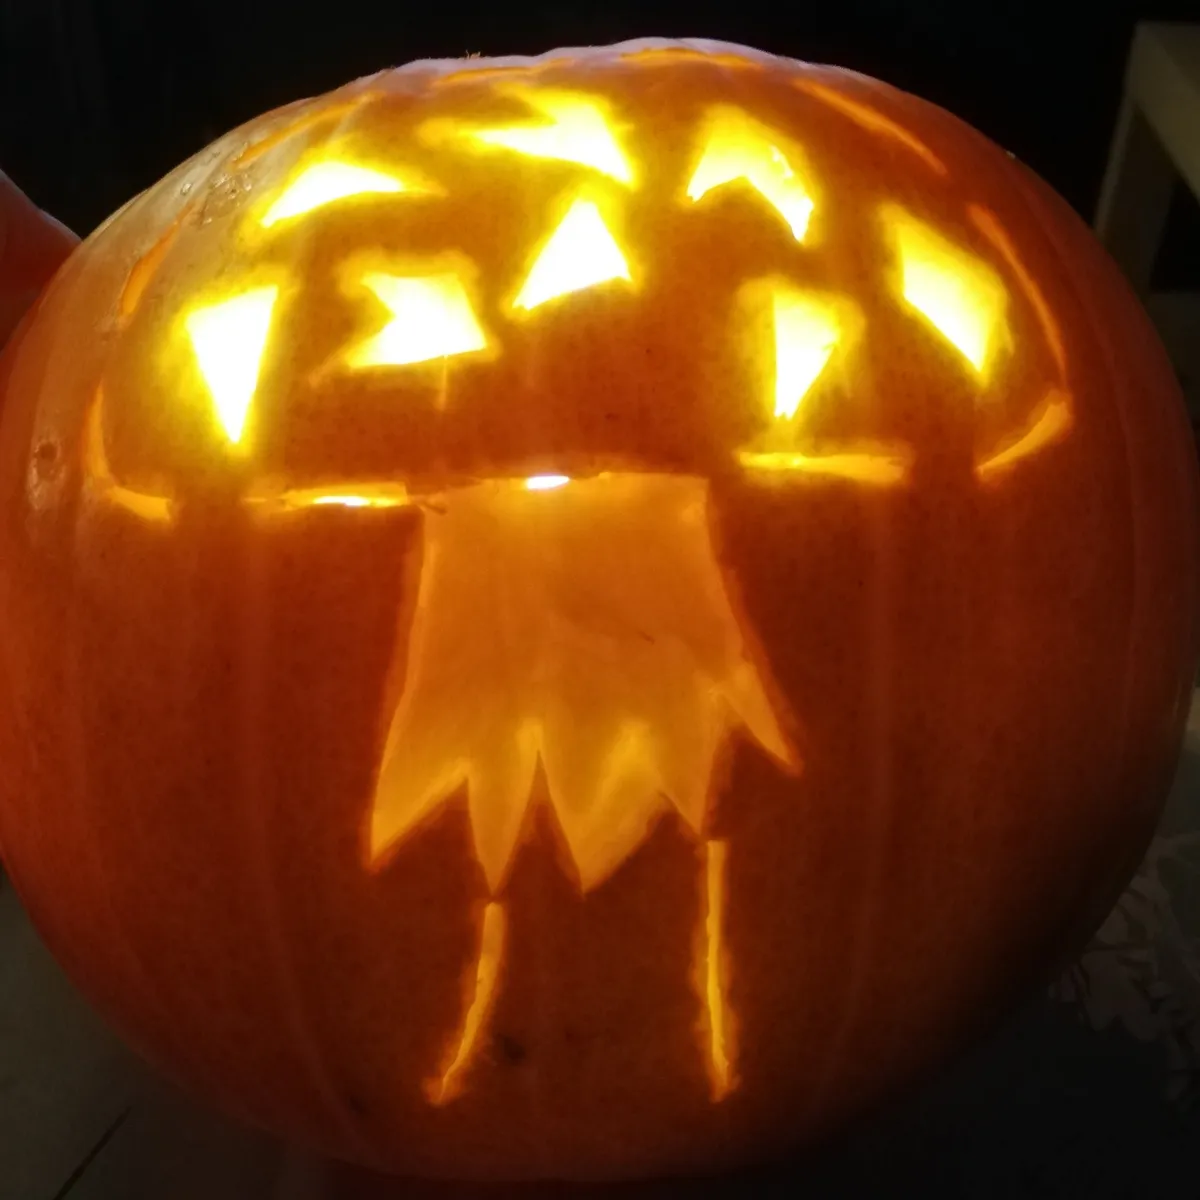 A pumpkin in the dark, lit up from within, showing a fly agaric carving in the pumpkin